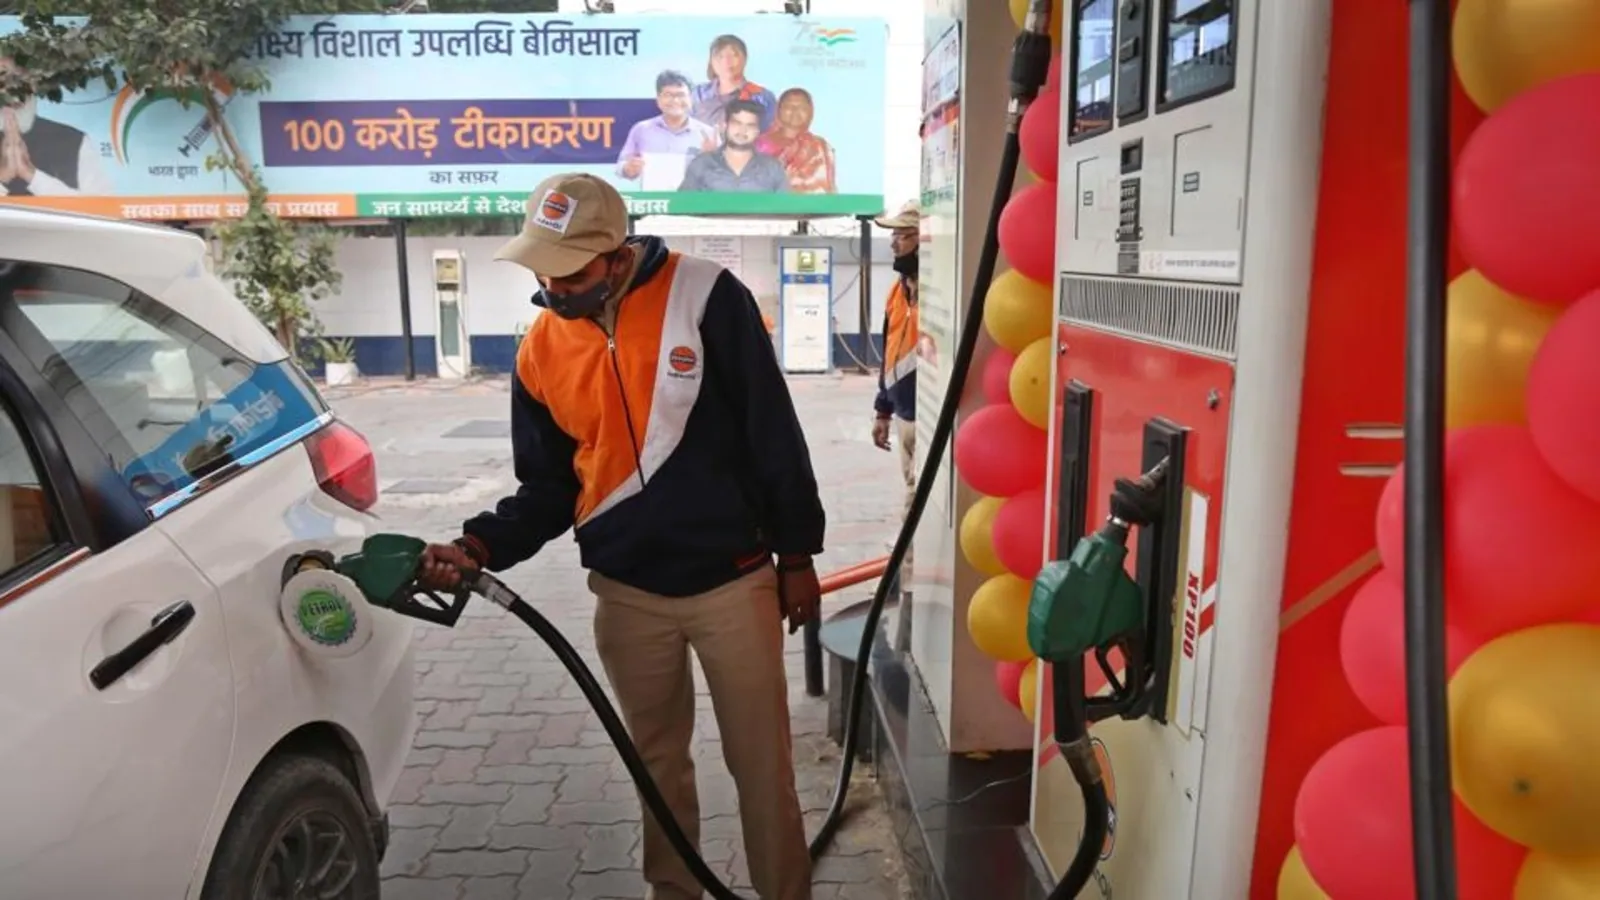 Russia-Ukraine crisis: Petrol and diesel price may surge in India soon